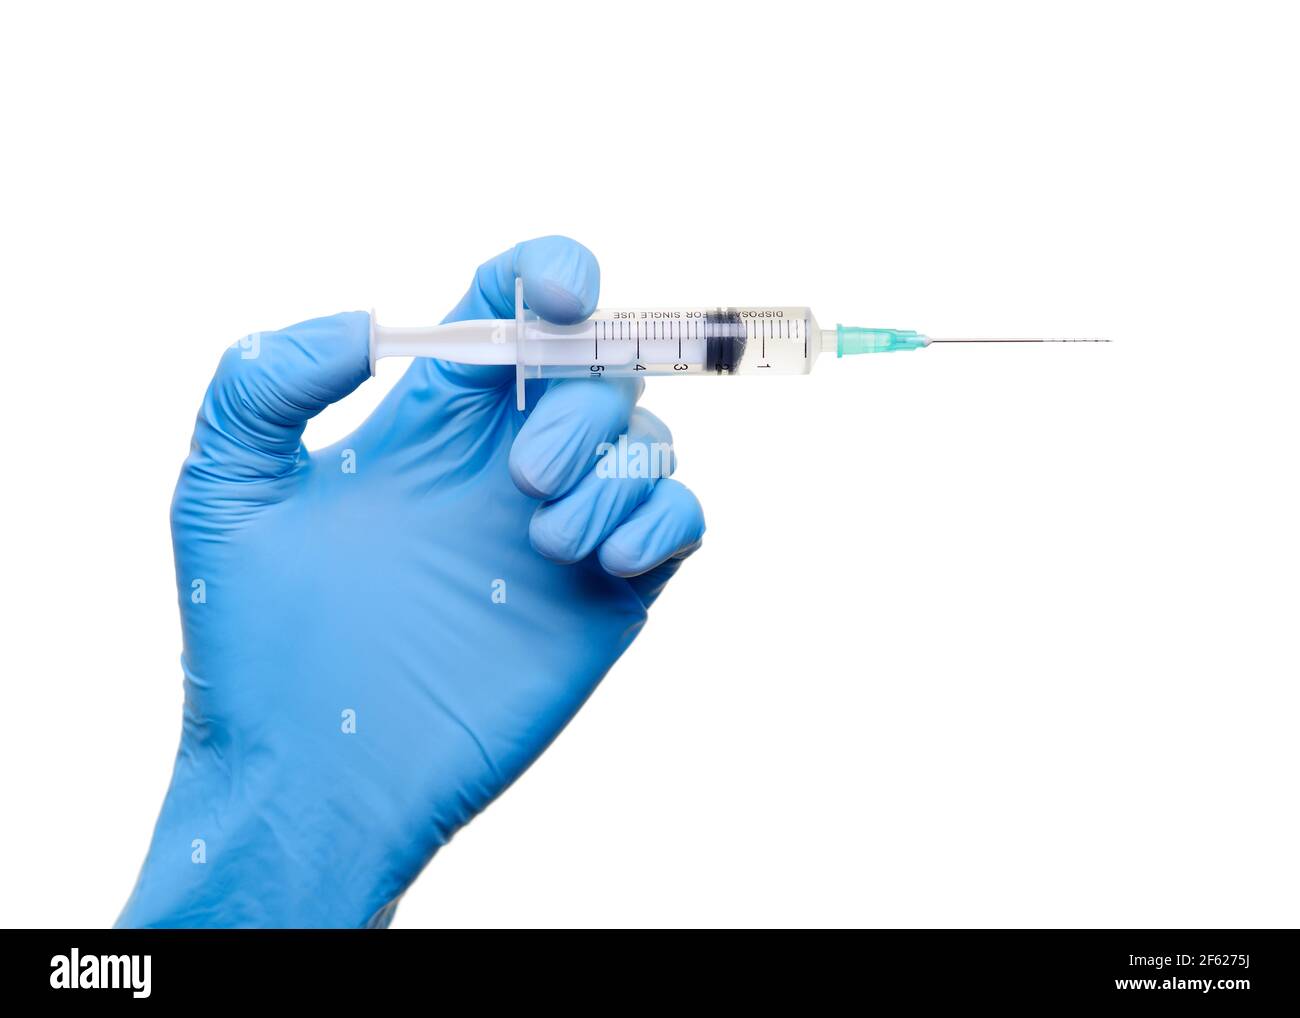 Hand Holding a Syringe Ready for an Injection Stock Photo